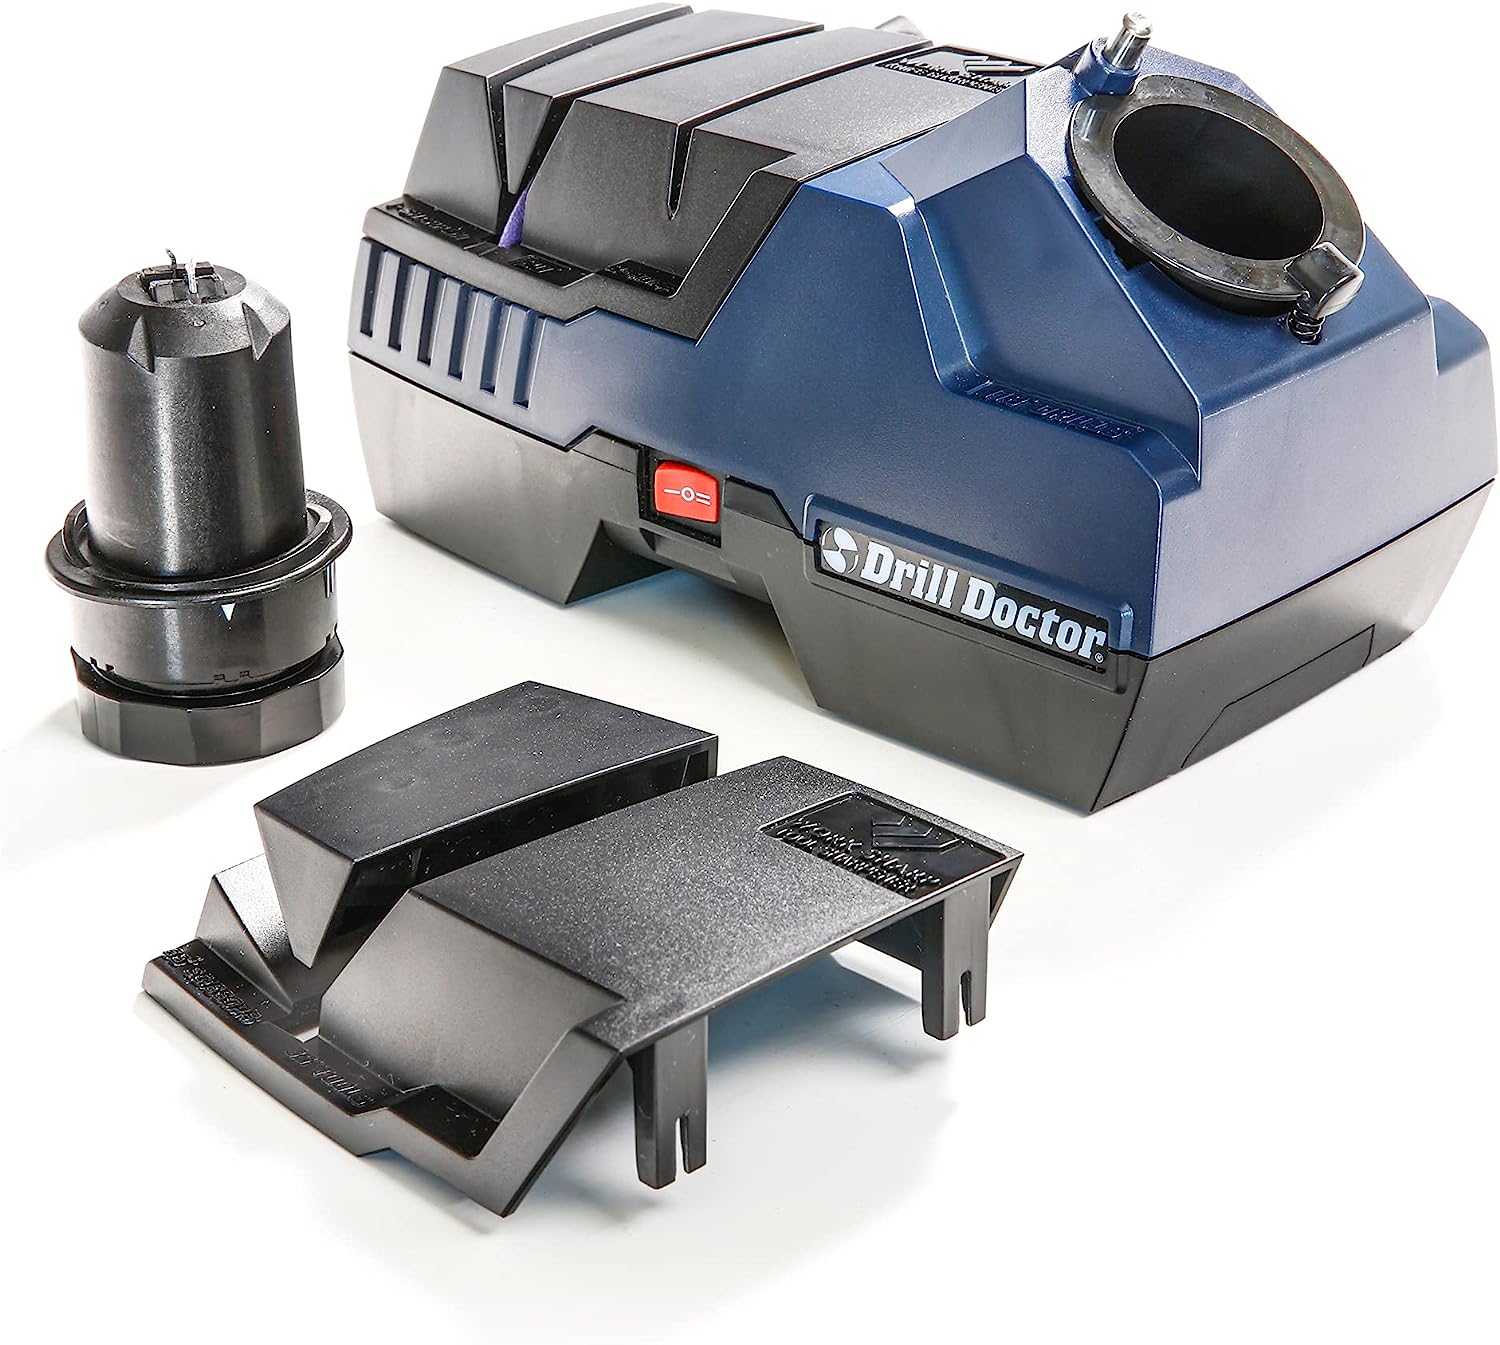 Drill Doctor X2 Drill Bit and Knife Sharpener With [...]